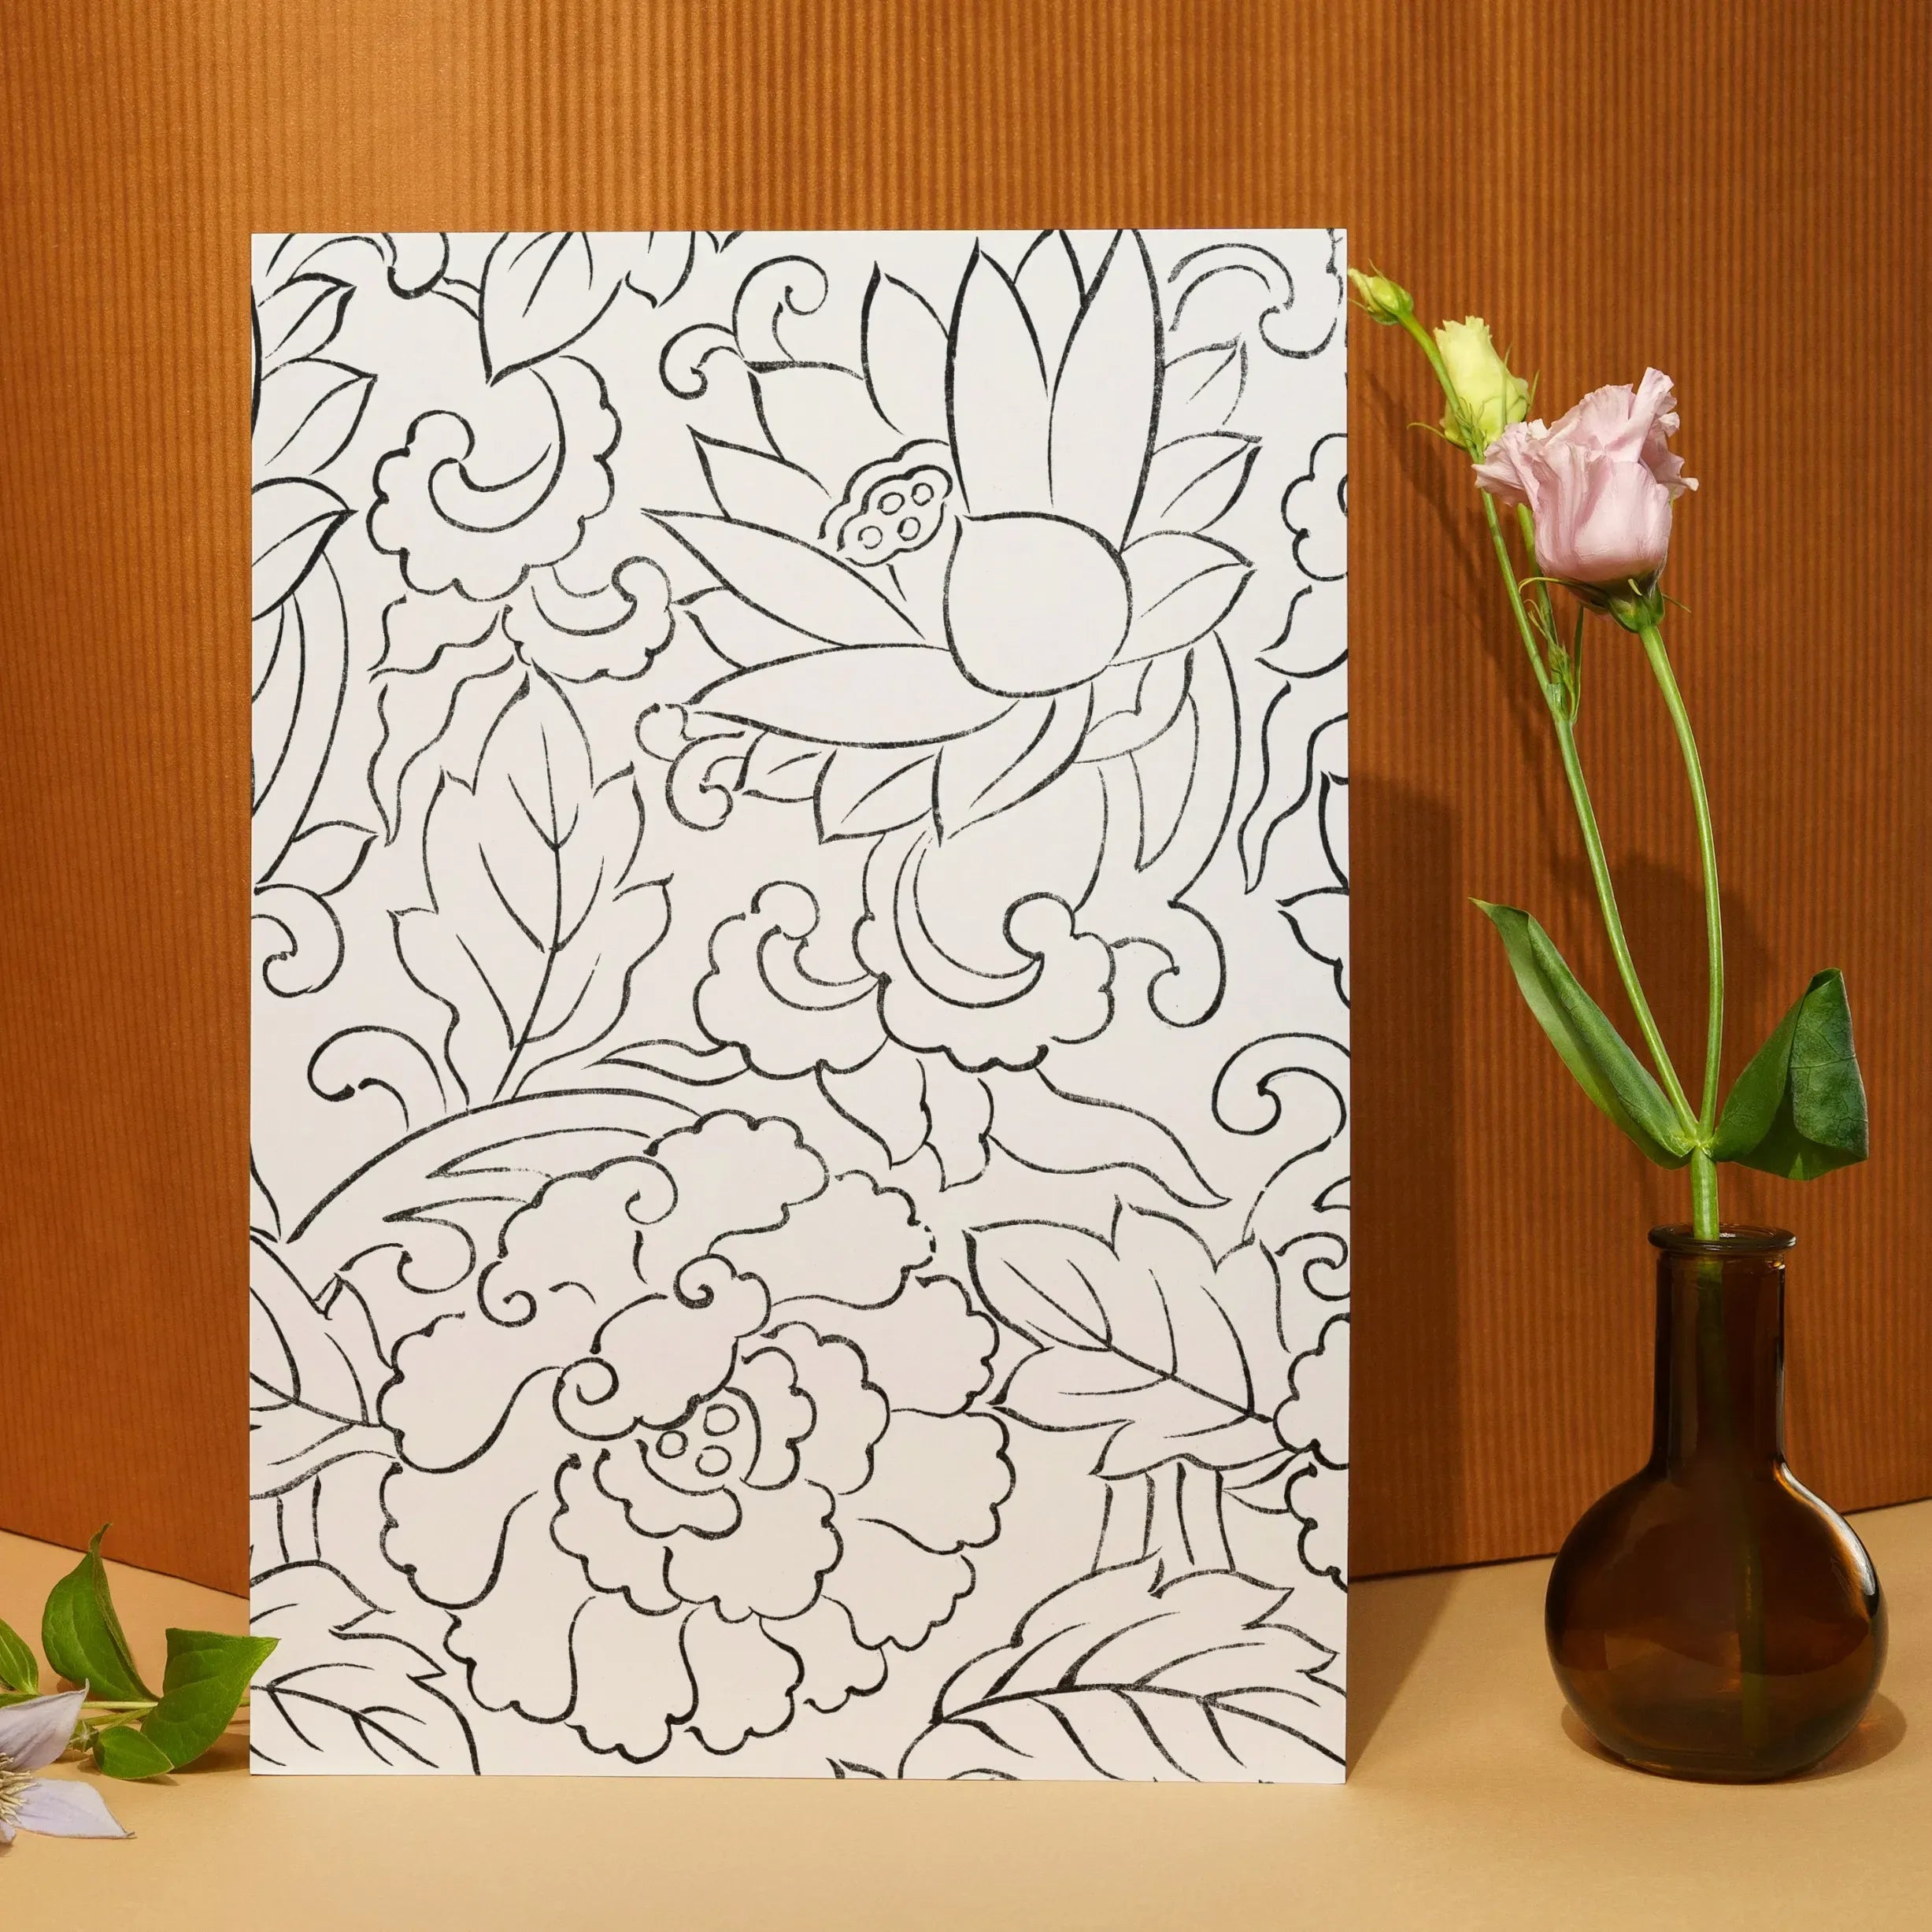 Black & White Floral Woodblock Print By Taguchi Tomoki Greeting Card - A5 Portrait / 1 Card - Greeting & Note Cards